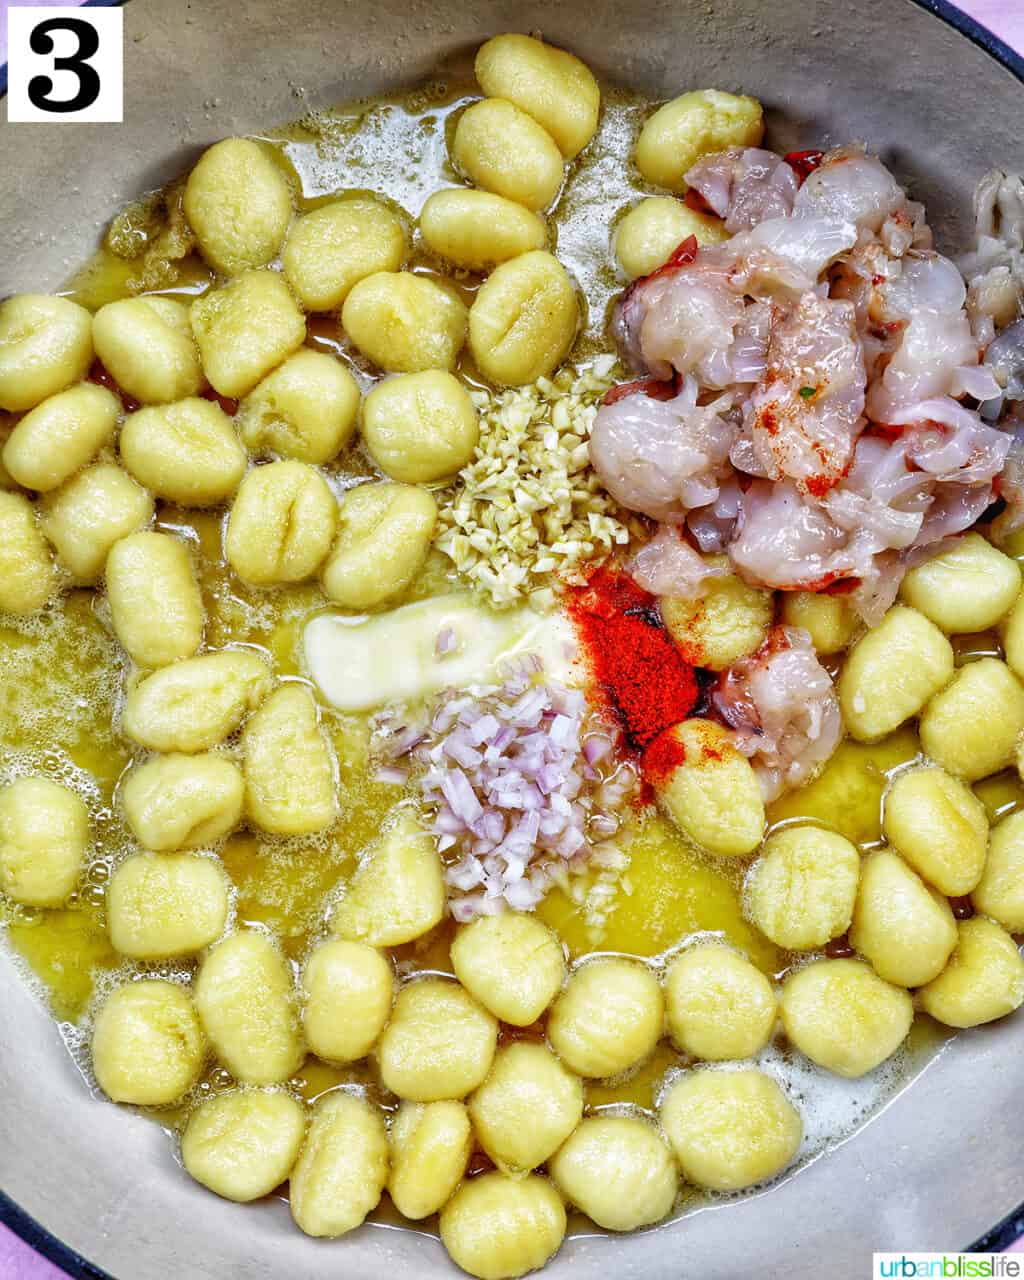 gnocchi, butter, lobster and seasonings in a skillet.